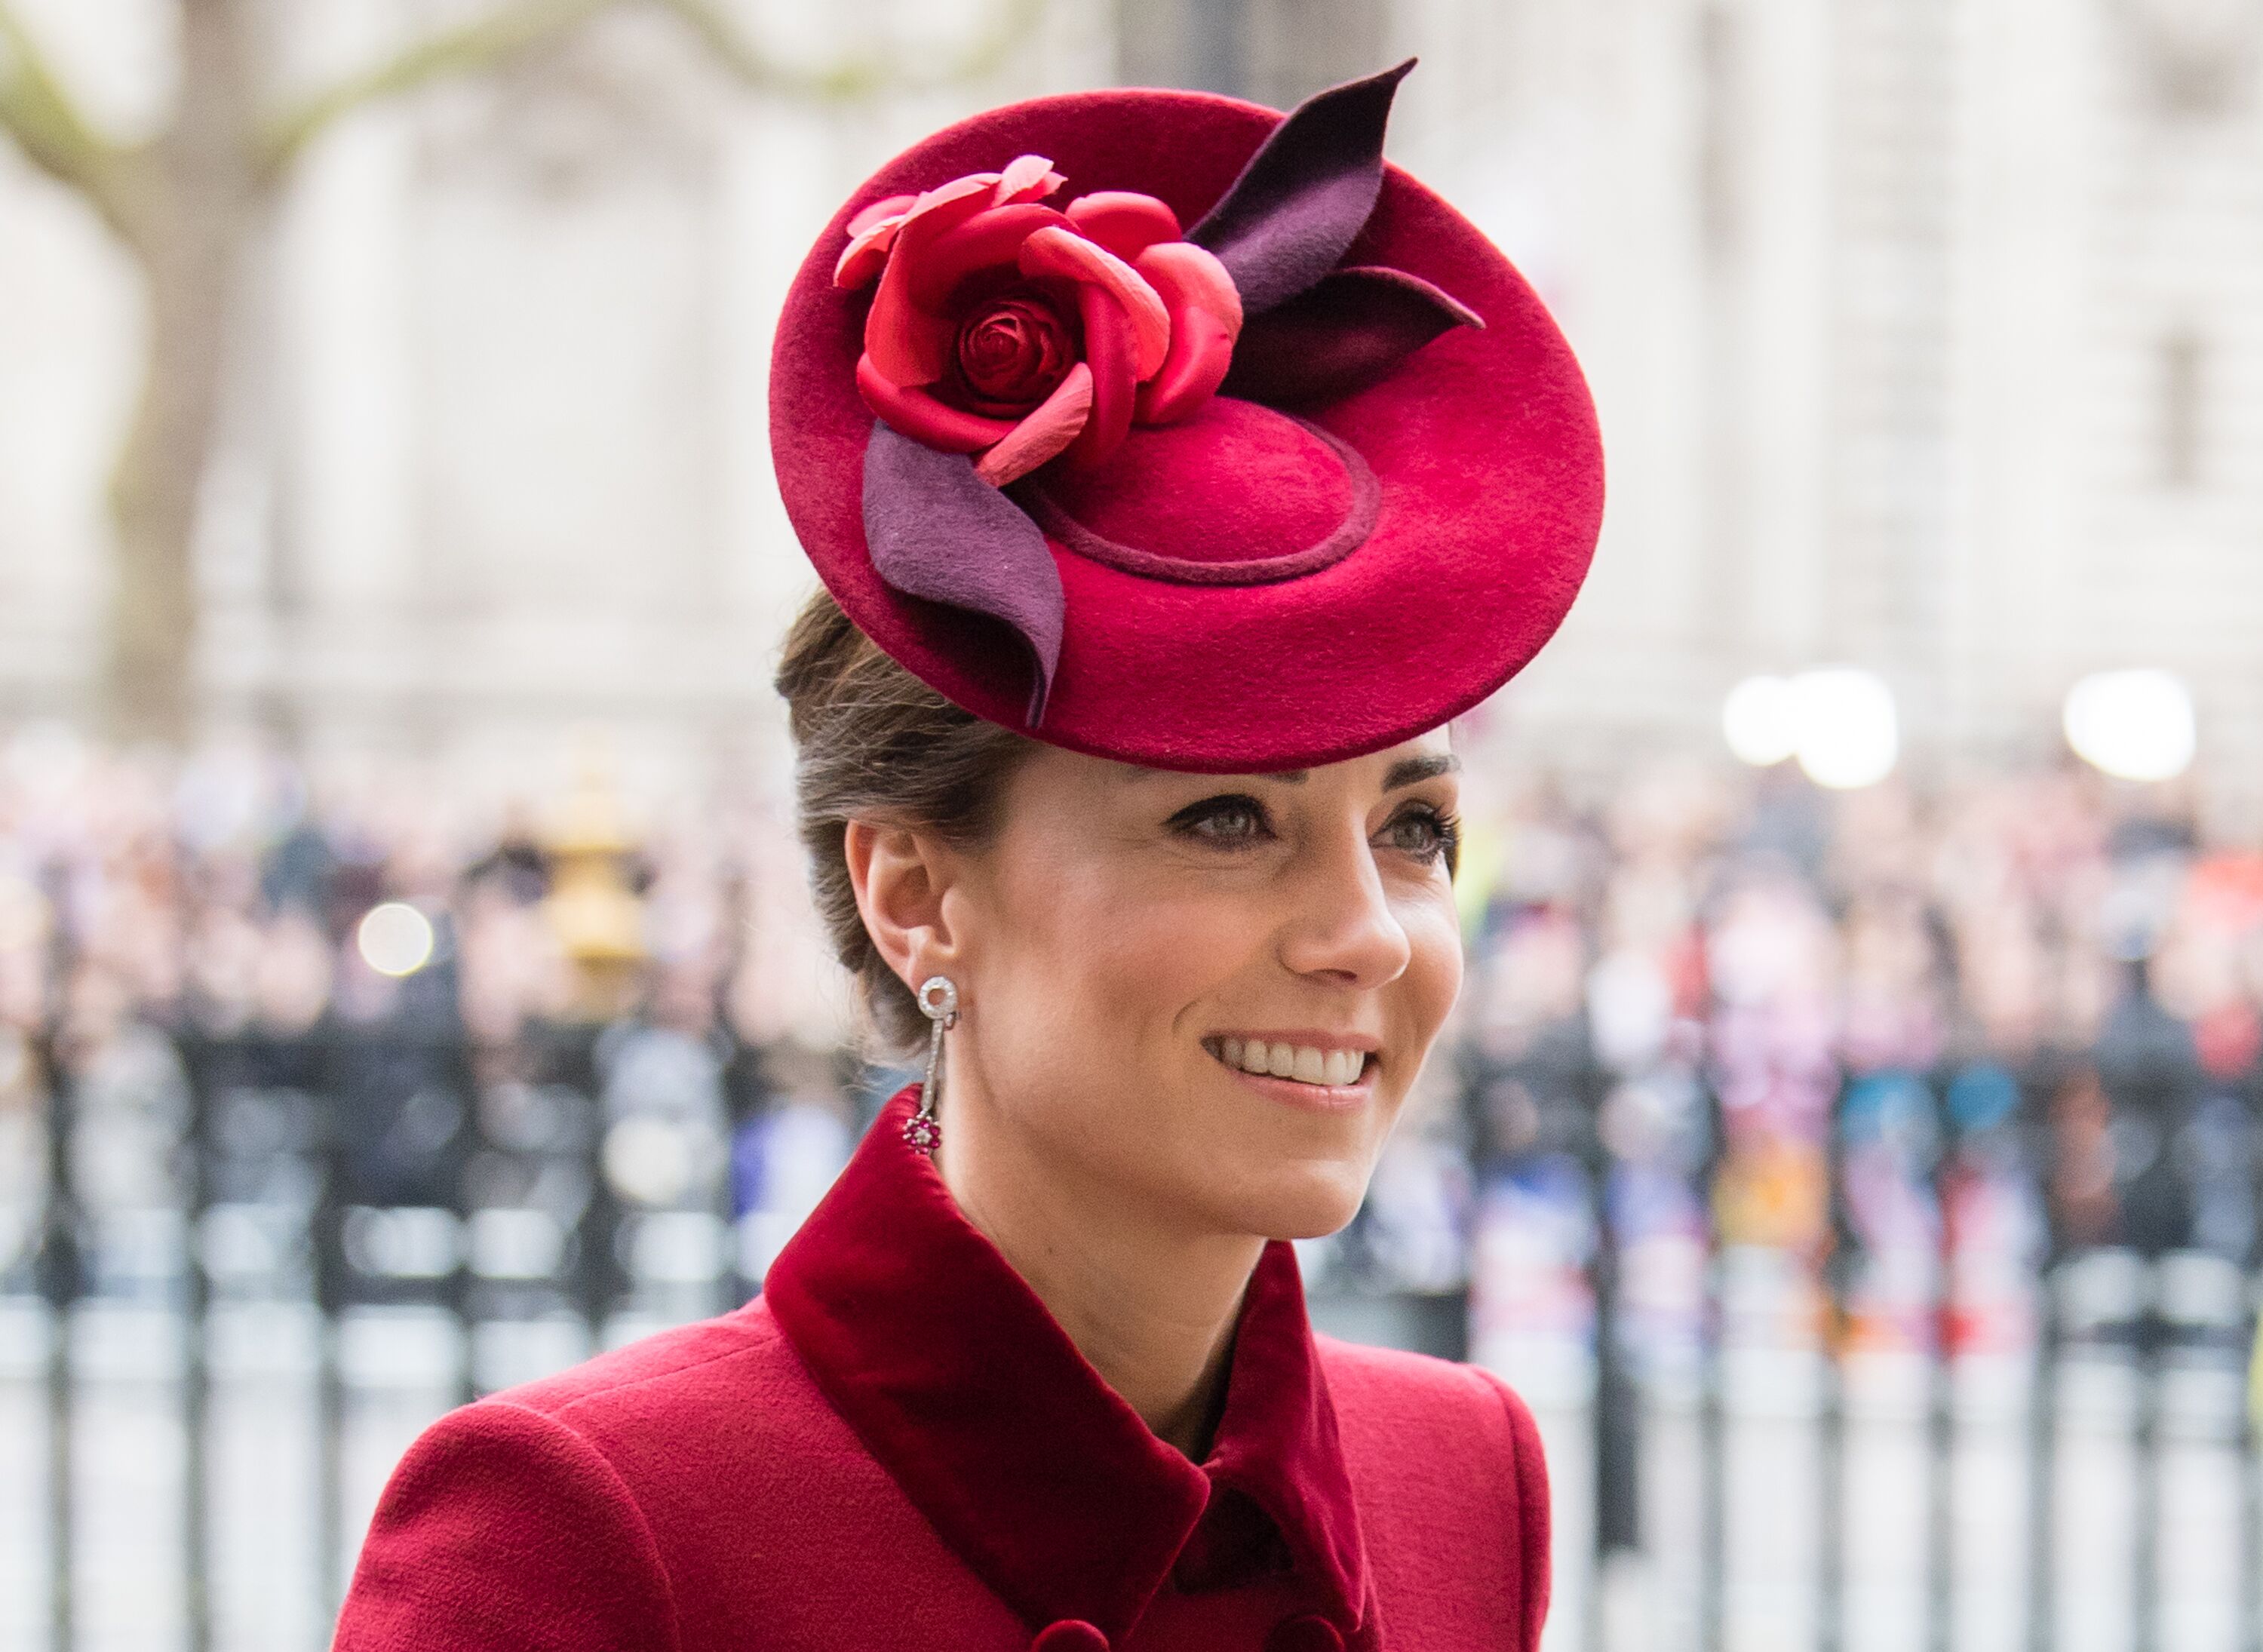 Kate Middleton attends the Commonwealth Day Service 2020 on March 09, 2020 in London, England. | Source: Getty Images